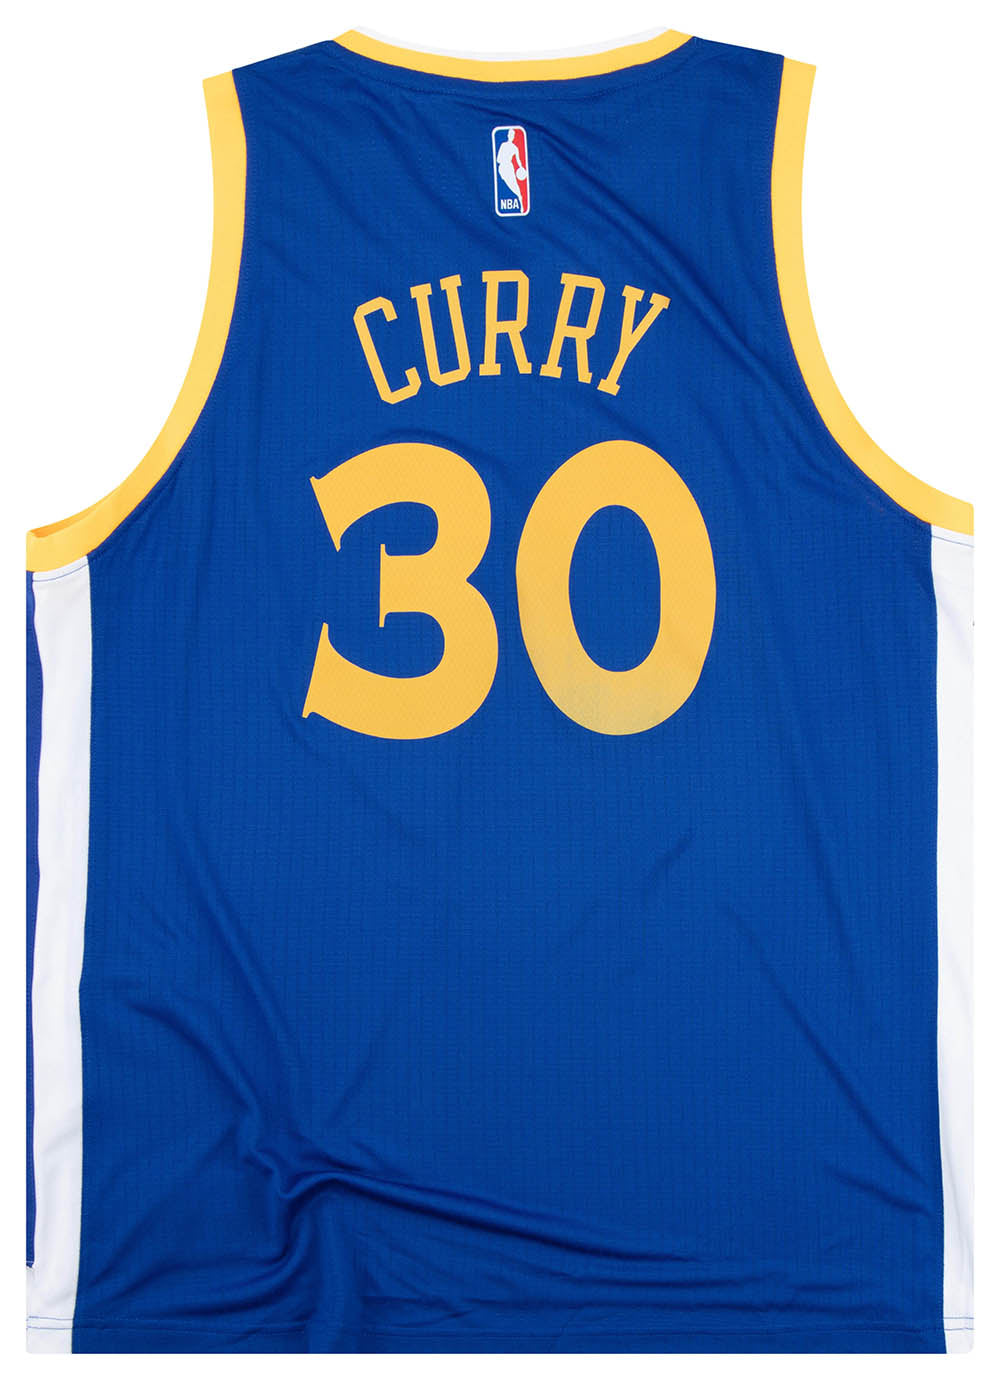 2014-17 GOLDEN STATE WARRIORS CURRY #30 ADIDAS SWINGMAN JERSEY (AWAY) L - W/TAGS